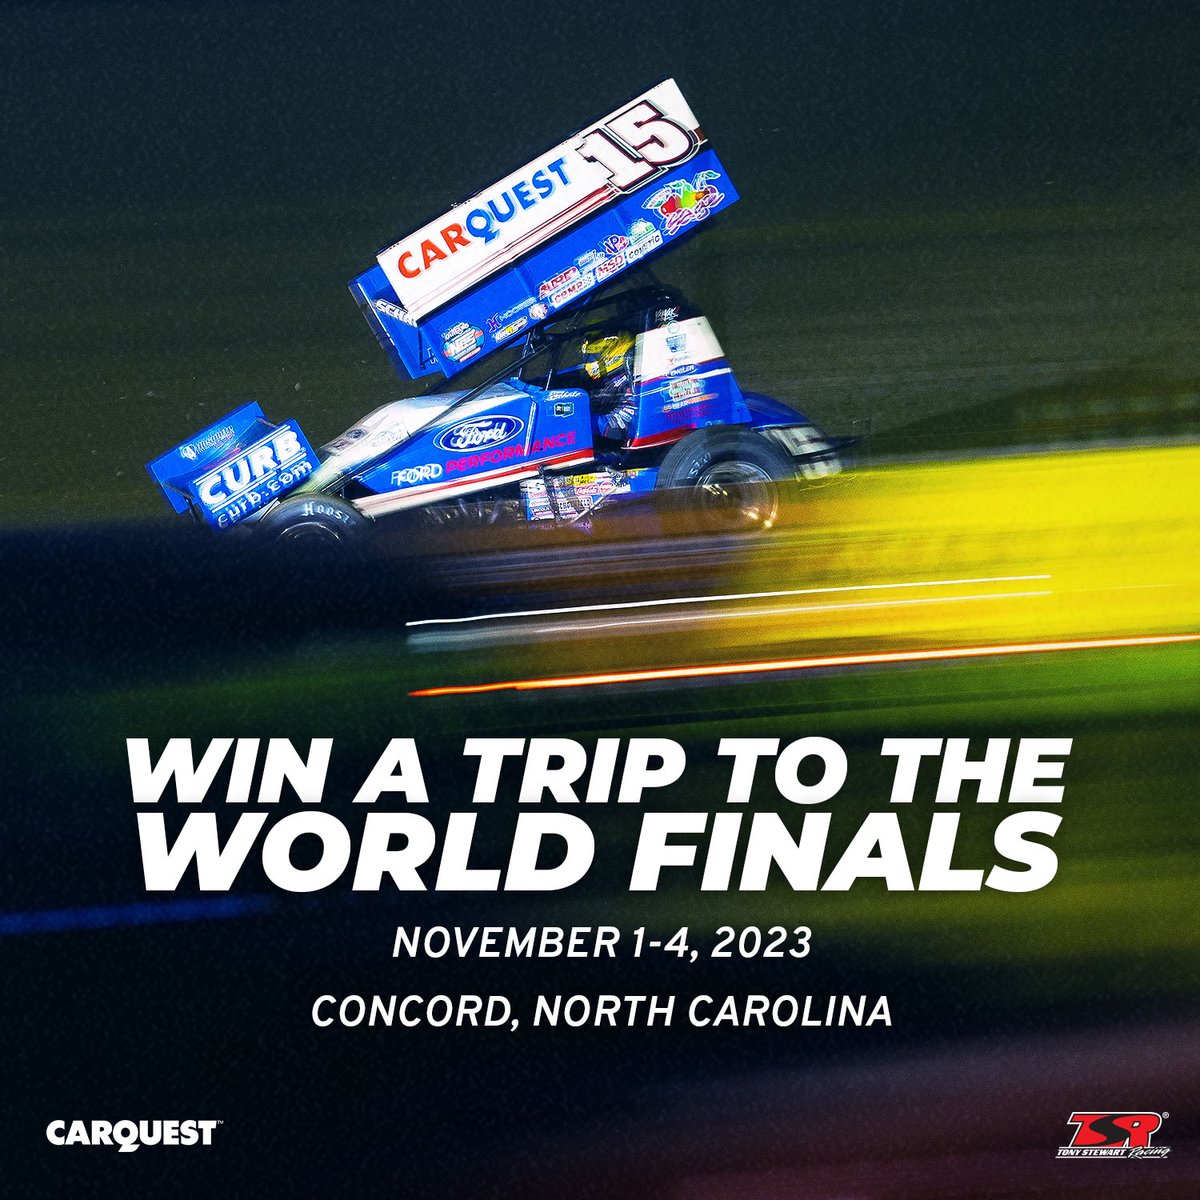 Win a trip for two to the @World of Outlaws Sprint Car Series World Finals at @Charlotte Motor Speedway, November 1st thru 4th! Meet @Donny Schatz & hang with the @Tony Stewart Racing team. https://t.co/TLN0GClQi7 https://t.co/8crBqSldJH